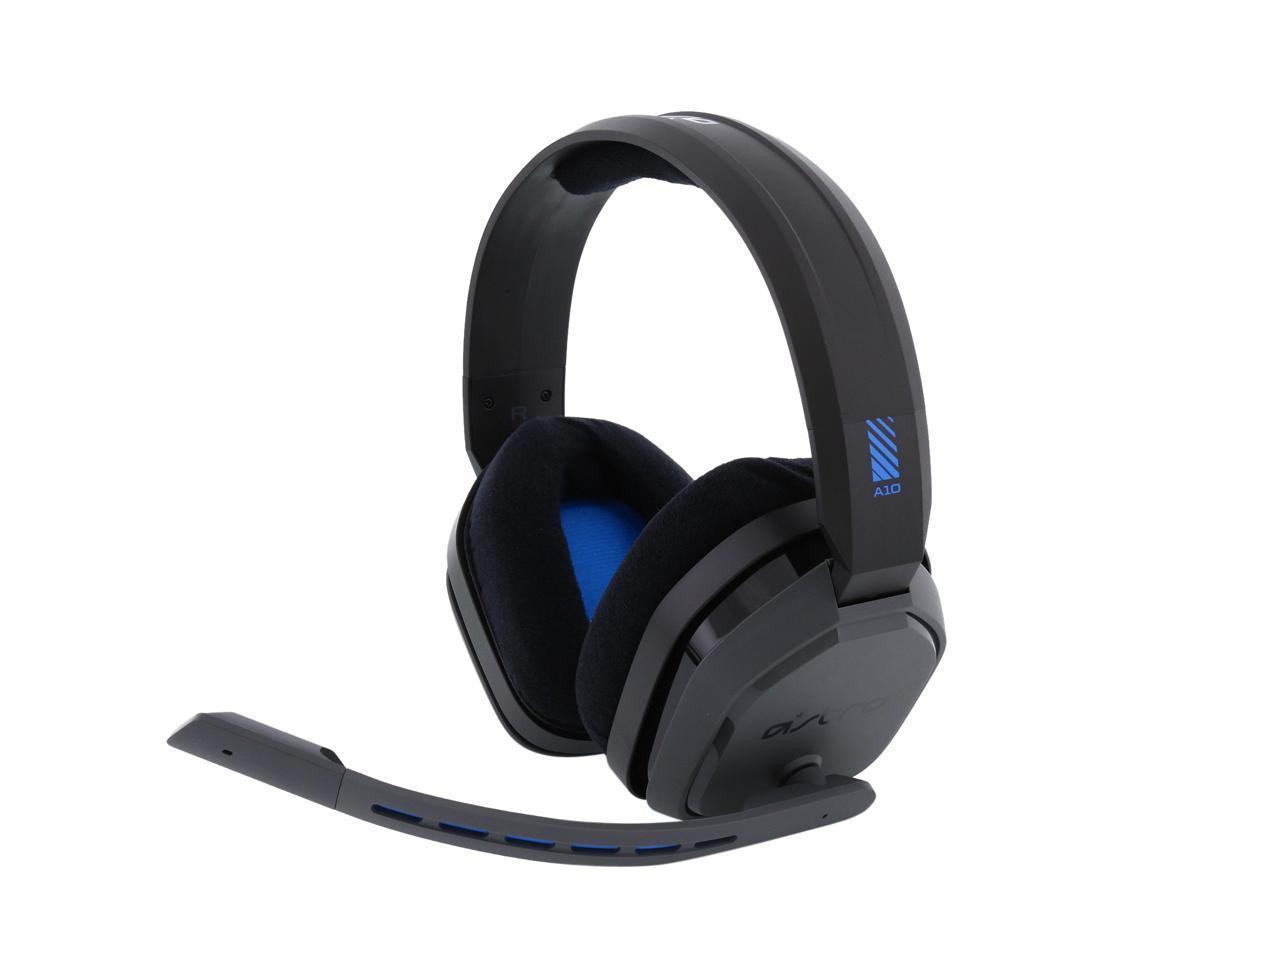 Astro A10 Headset Ps4 Mic Not Working Cheaper Than Retail Price Buy Clothing Accessories And Lifestyle Products For Women Men